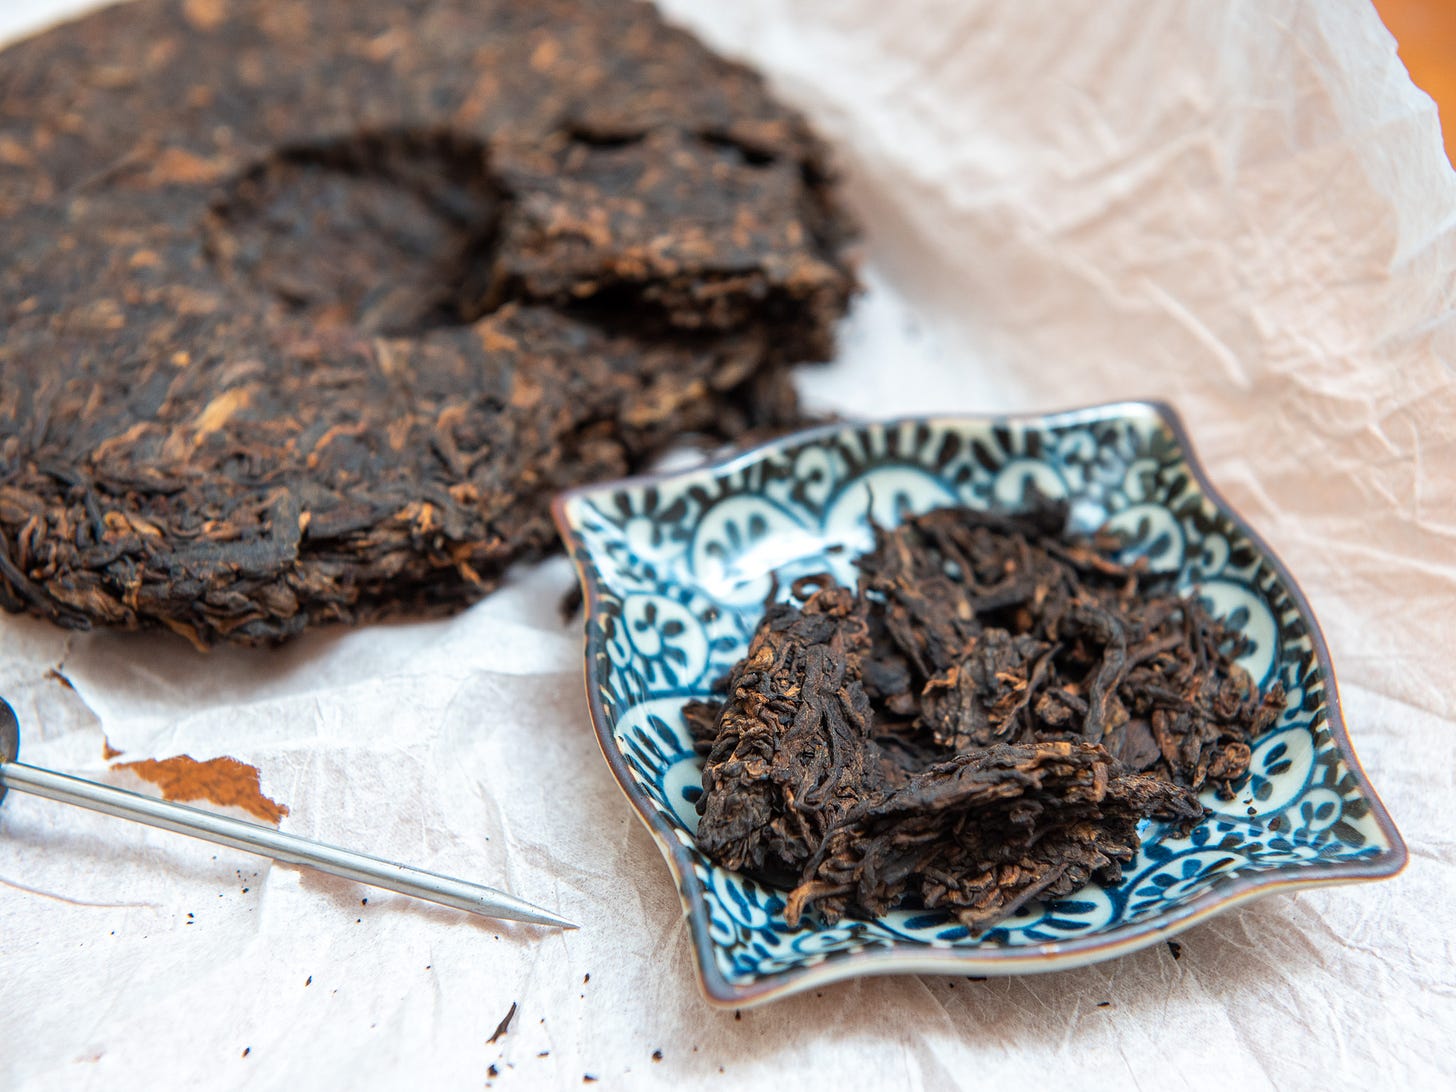 ID: Flaked off portion of Smokeshou ripe puer